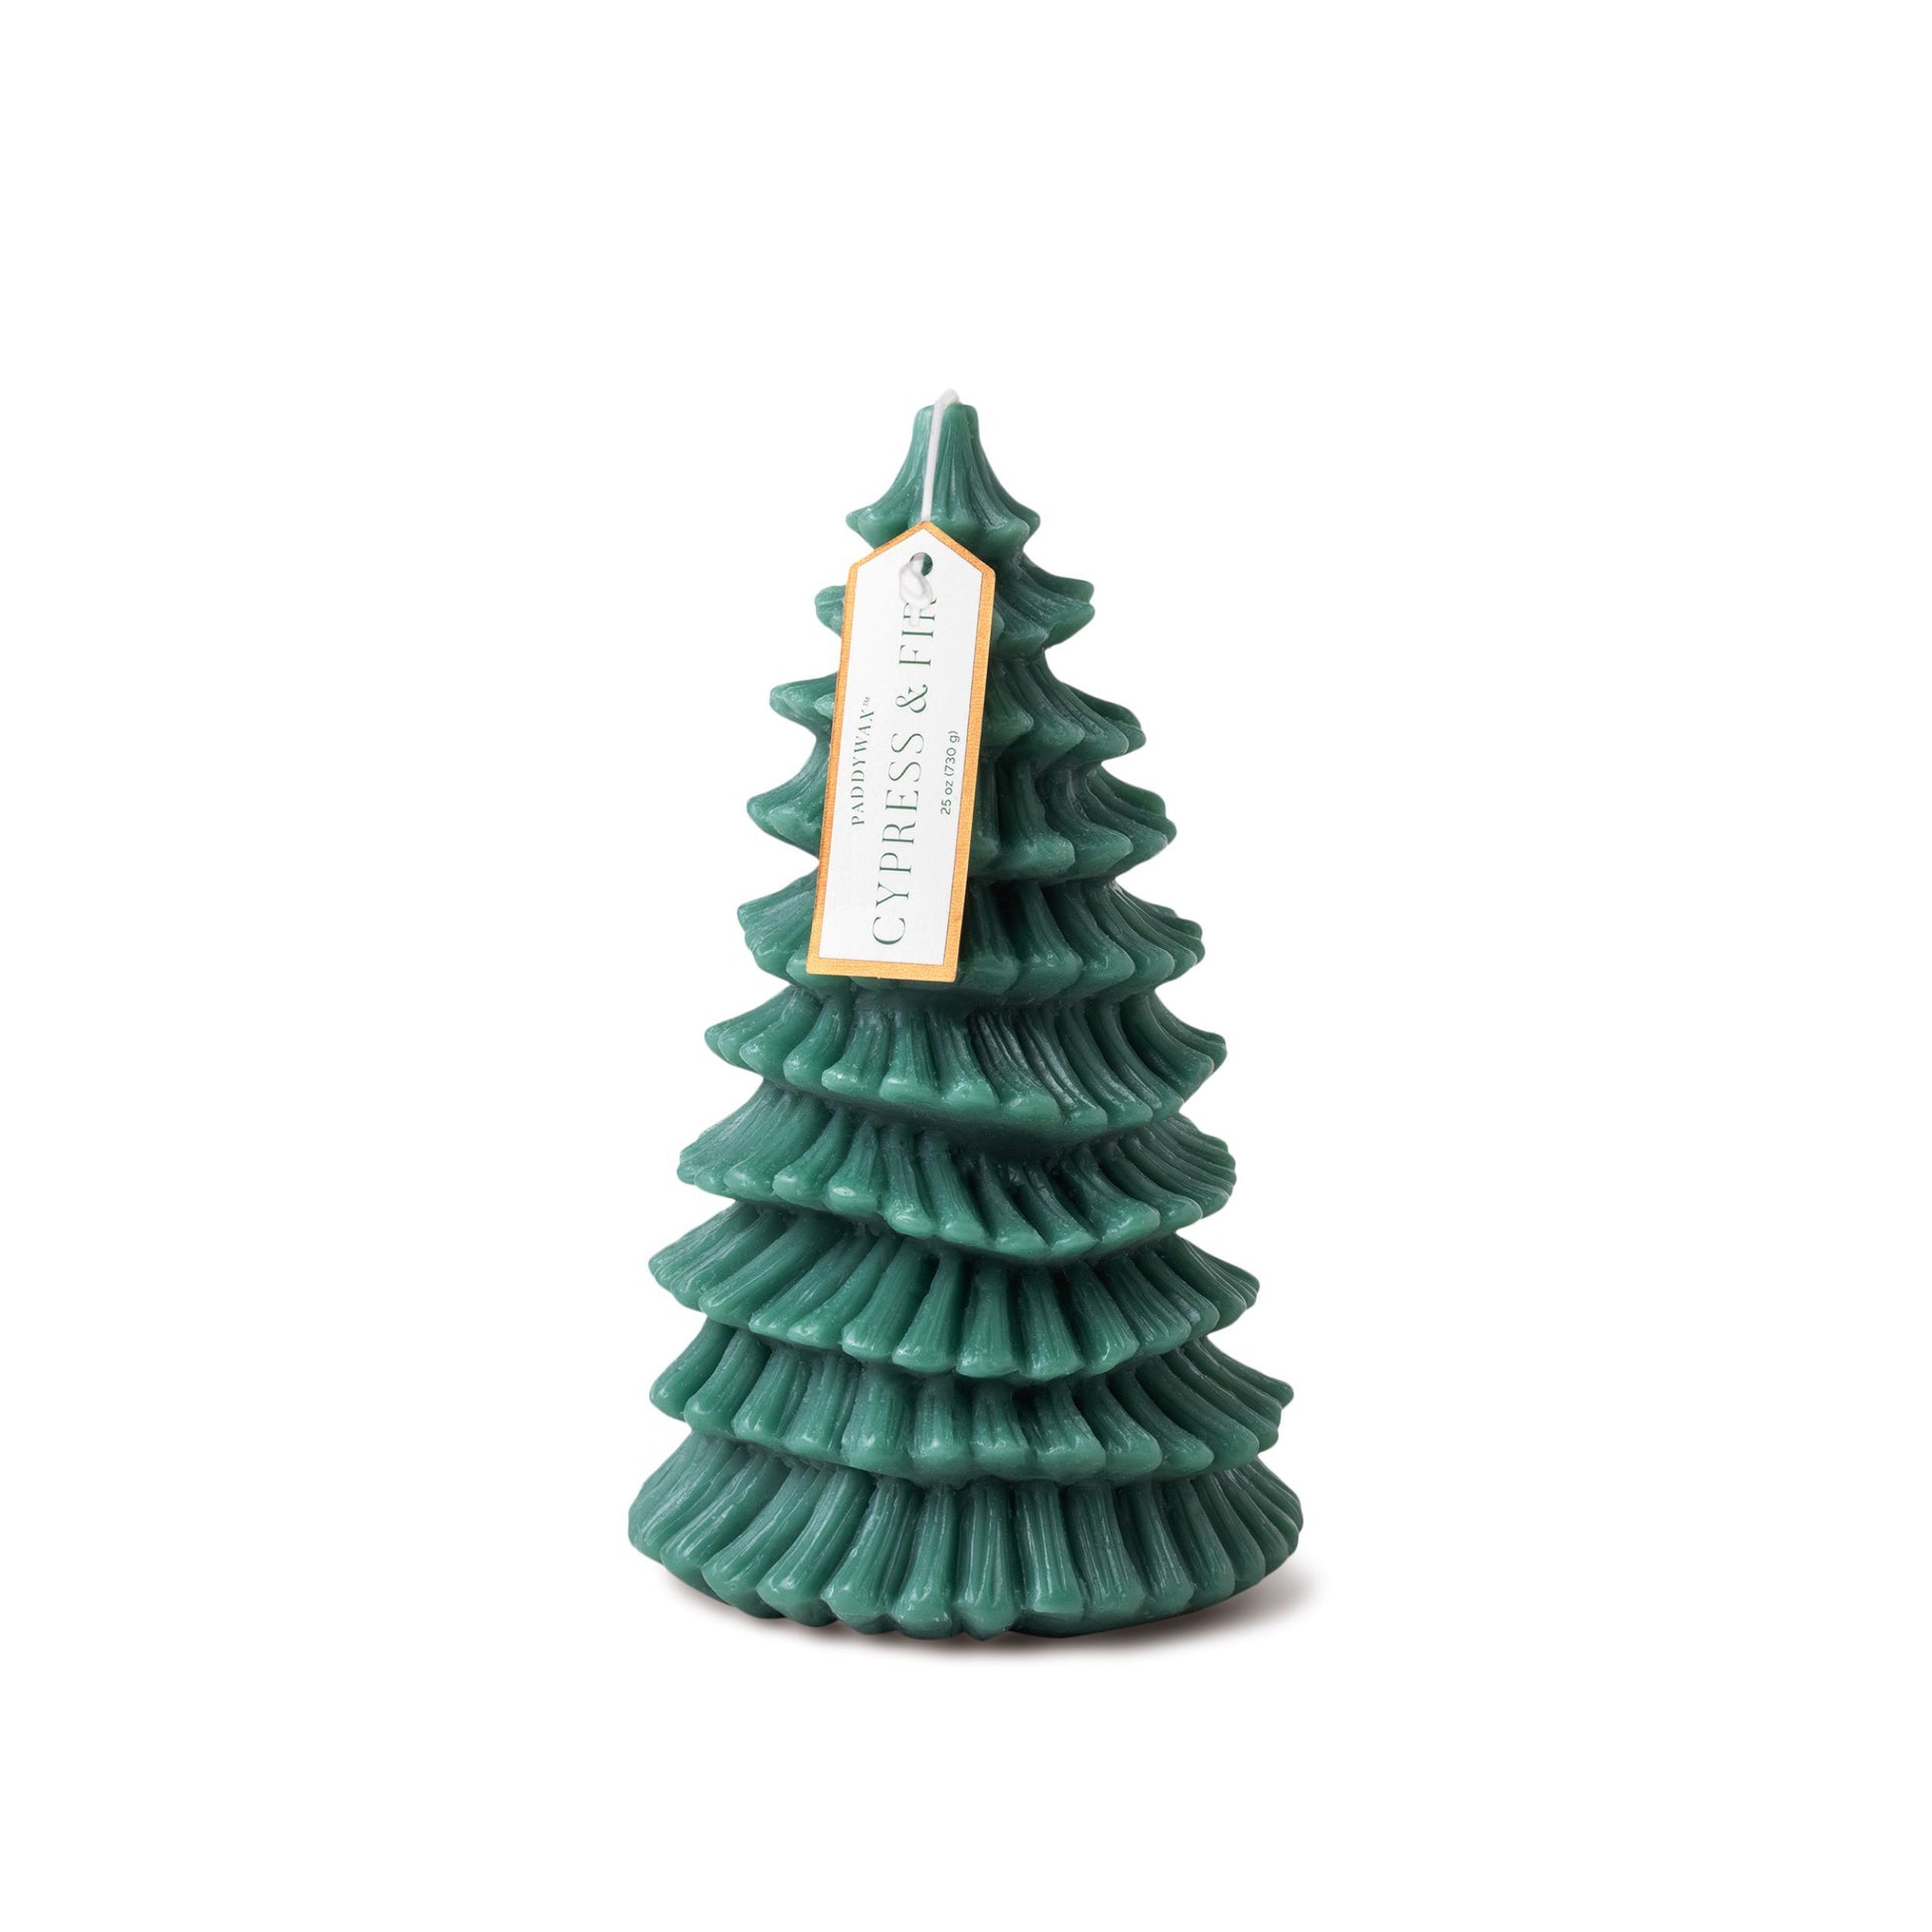 Small dark green candle in the shape of a fir tree; white and gold tag hanging from the top reads "Cypress & Fir"